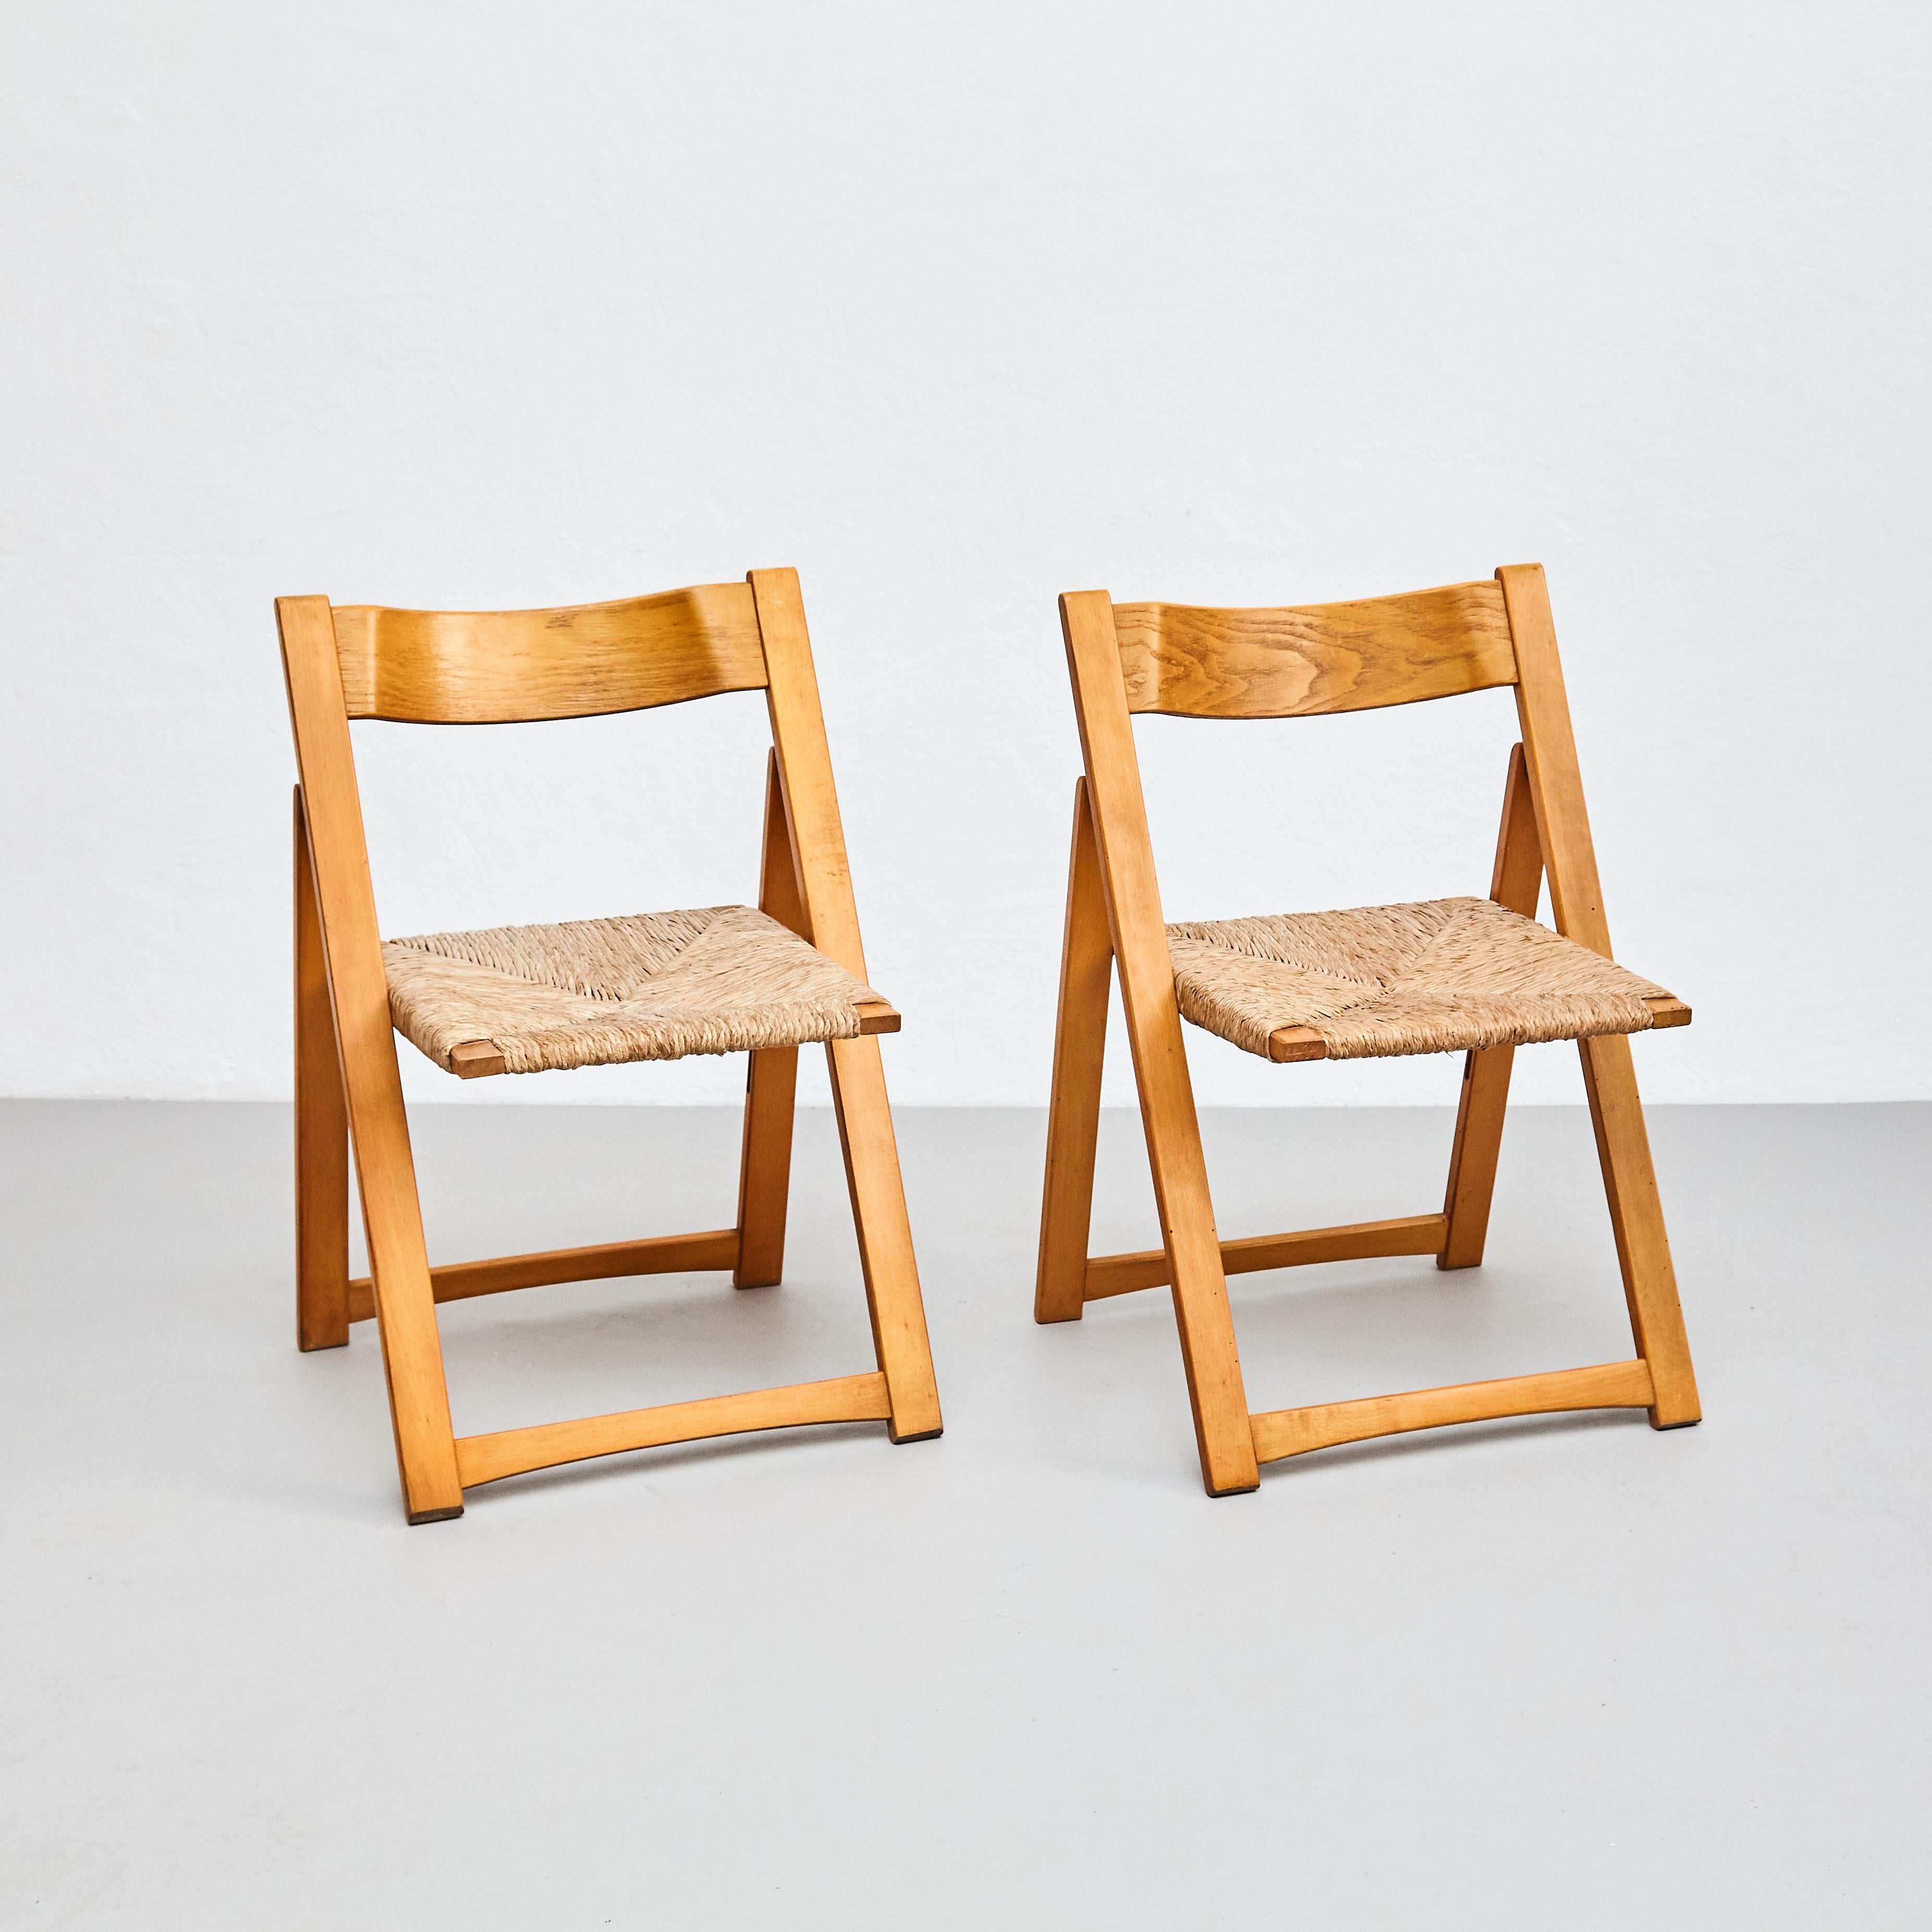 Pair of rationalist rattan and wood folding chairs.

Manufactured in France, circa 1960.

In original condition with minor wear consistent of age and use, preserving a beautiful patina.

Materials: 
Wood, rattan 

Dimensions: 
D 47.2 cm x